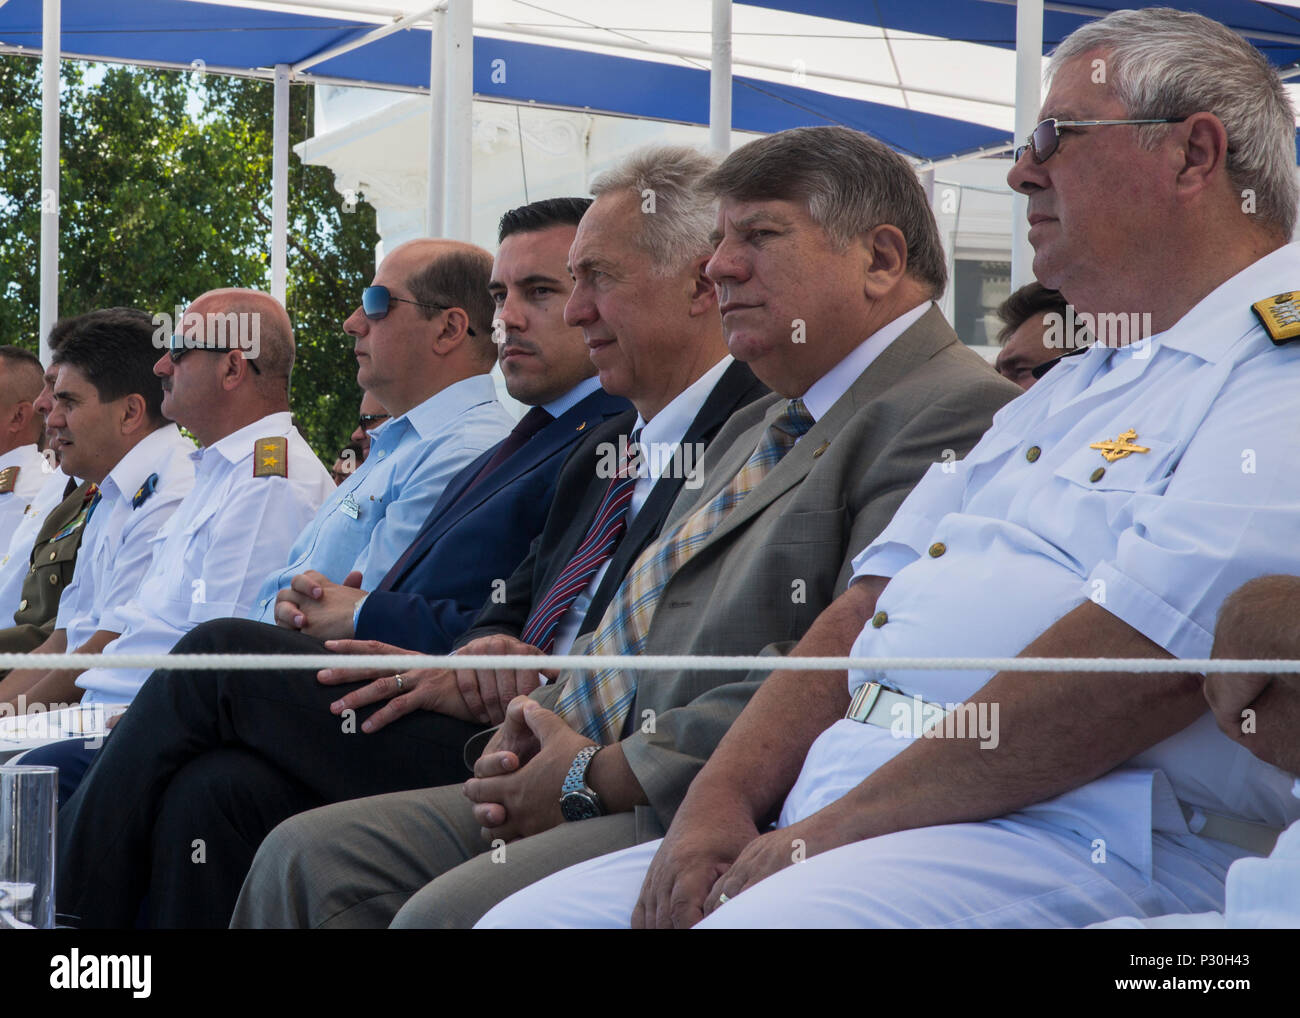 U.S. Ambassador to Romania Hans Klemm, third from the right, watches the festivities during the 114th annual Navy Day celebration at the Port of Constanţa, Romania, Aug. 15, 2016. U.S. Sailors and Marines supporting the Black Sea Rotational Force 16.2 helped pay tribute to the prestigious history of the Romanian navy and highlighted the military’s movement toward new developments and modernizations. Black Sea Rotational Force is an annual multilateral security cooperation activity between the U.S. Marine Corps and partner nations in the Black Sea, Balkan and Caucasus regions designed to enhanc Stock Photo